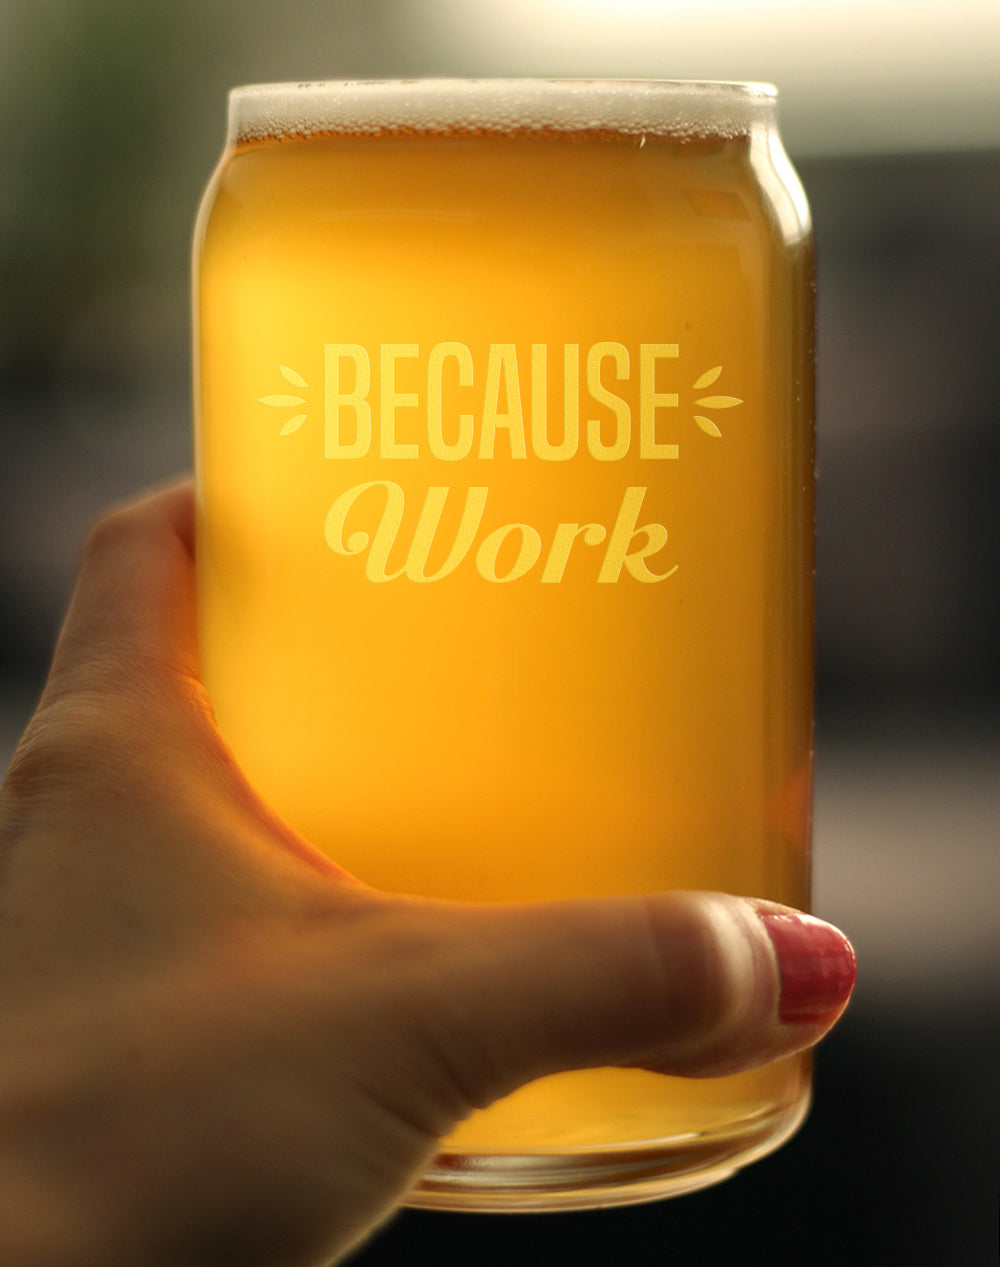 Because Work - 16 Ounce Beer Can Pint Glass